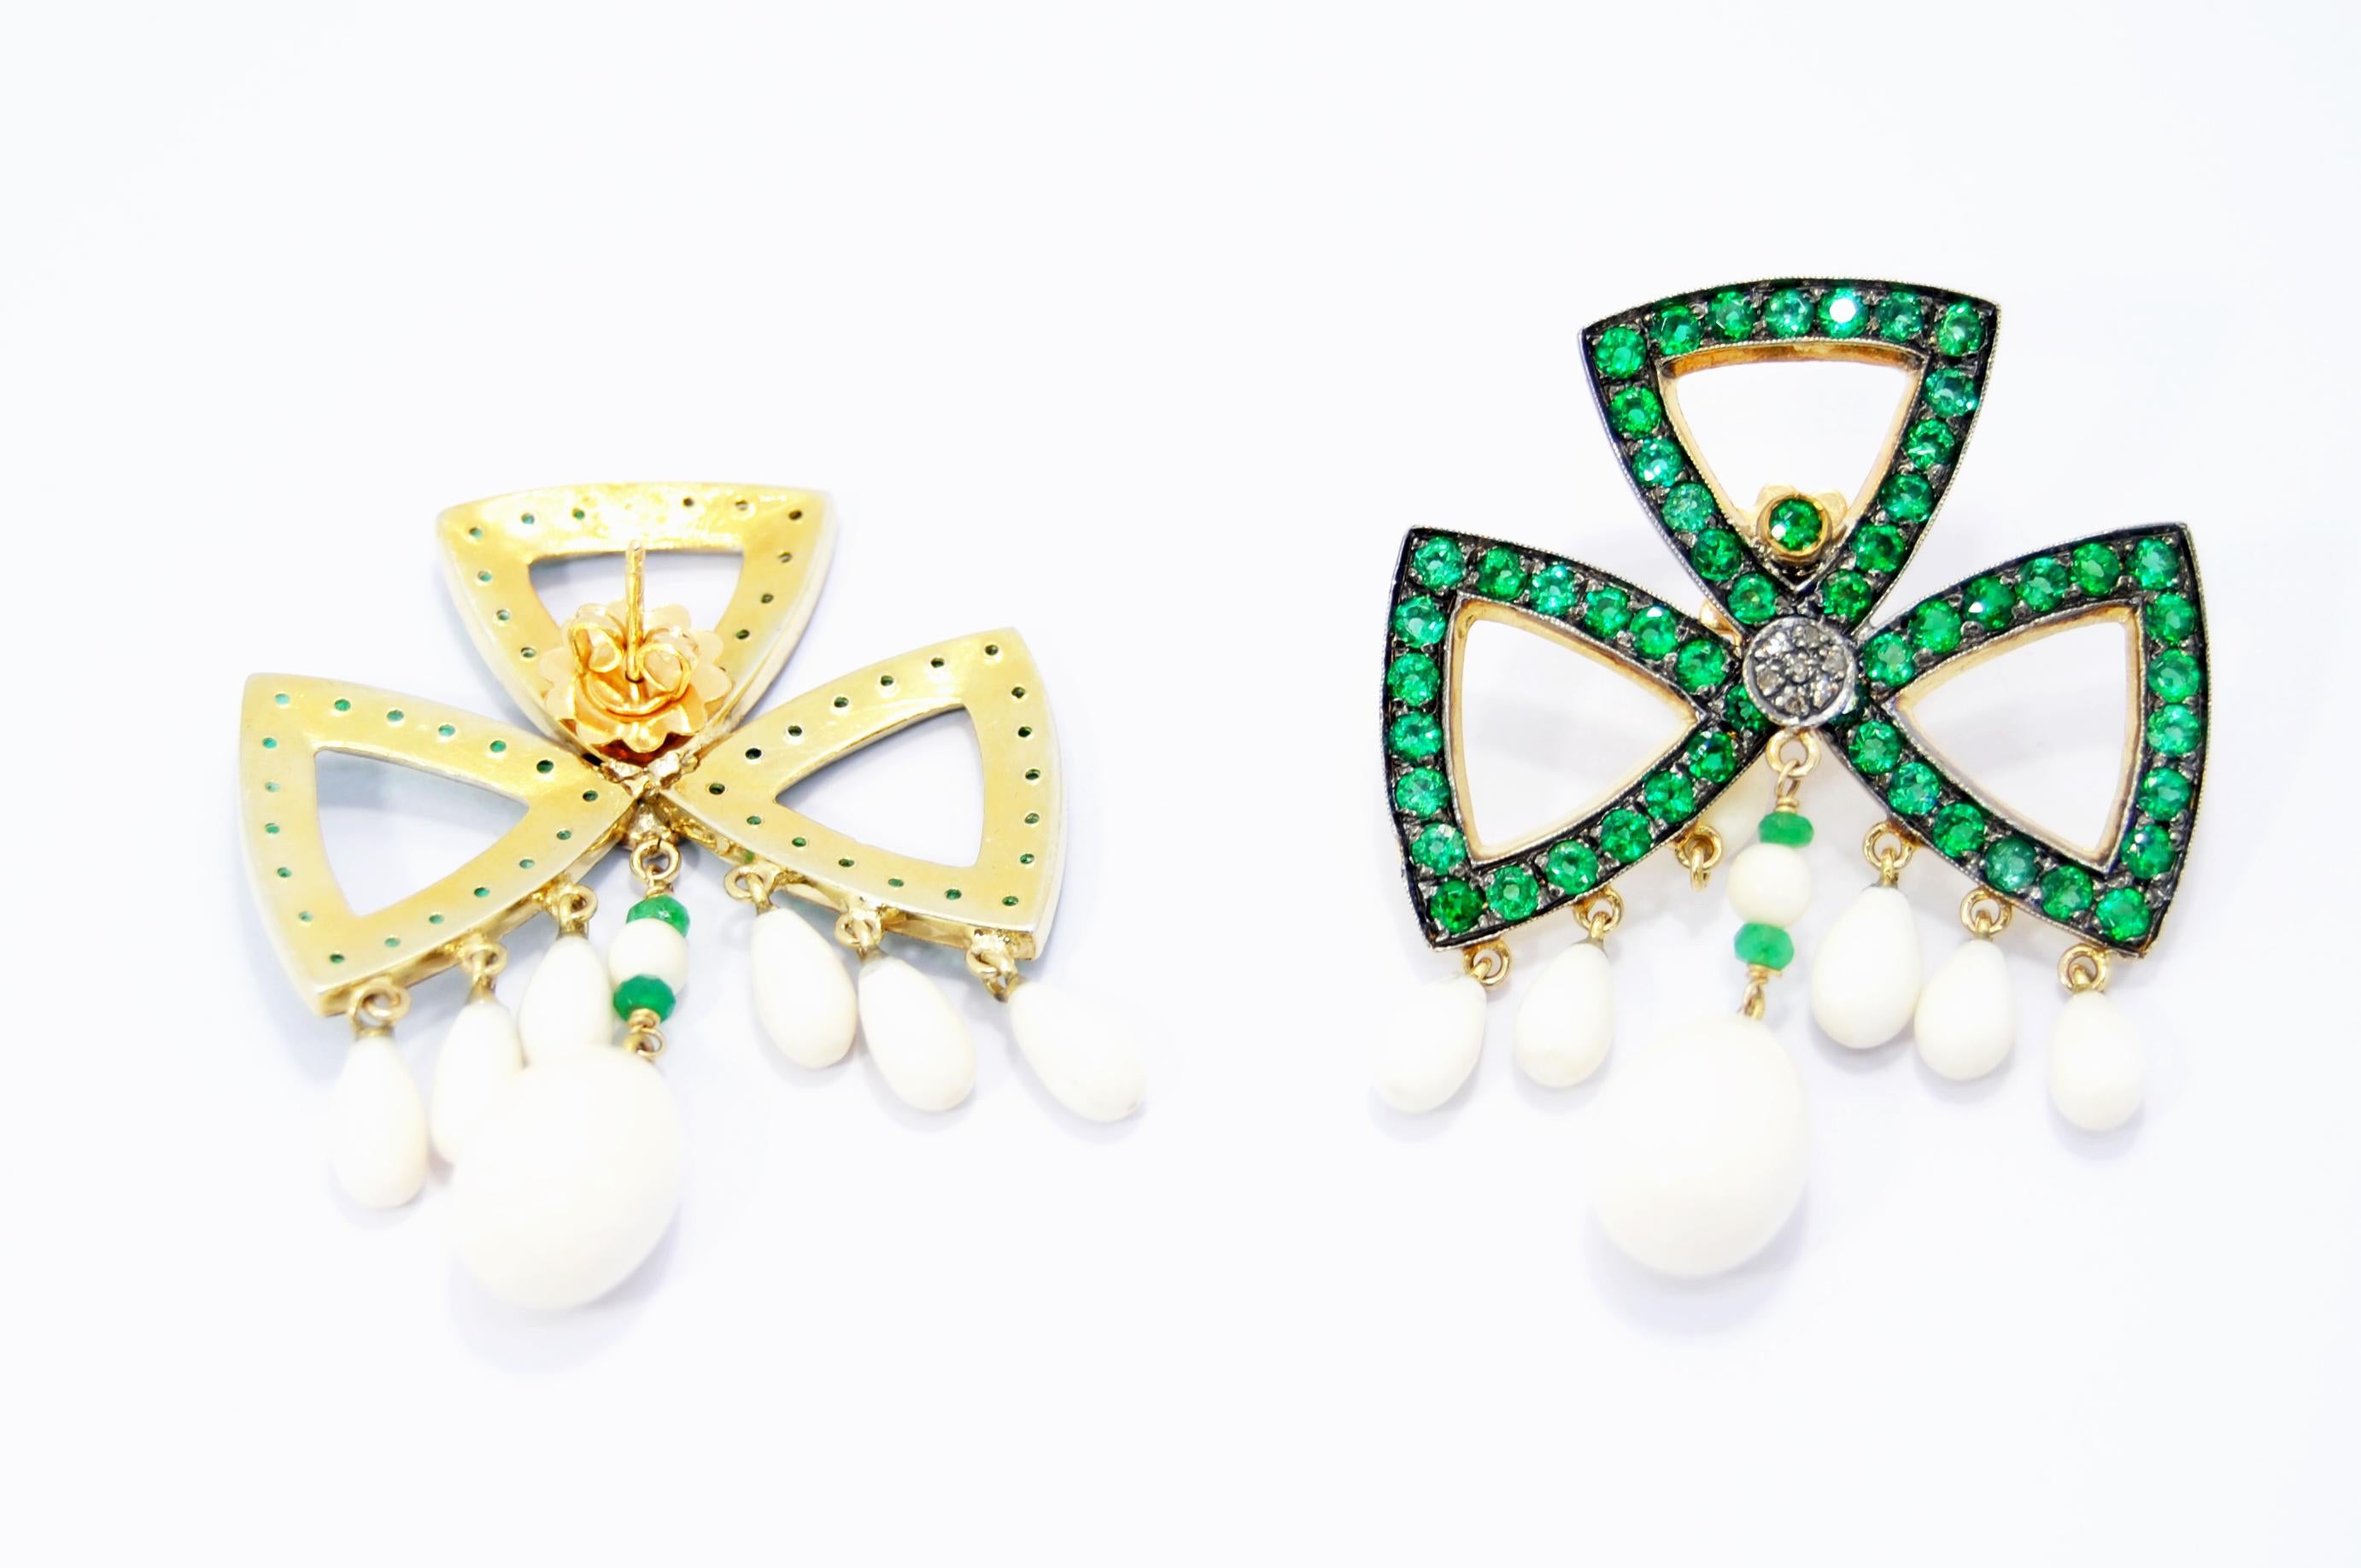 Irama Pradera is a Young designer from Spain that searches always for the best gems and combines classic with contemporary mounting and styles. 
The earrings measure 35mm in length and have a gross weight of 5gr.
Tsavorites total  2ct 
